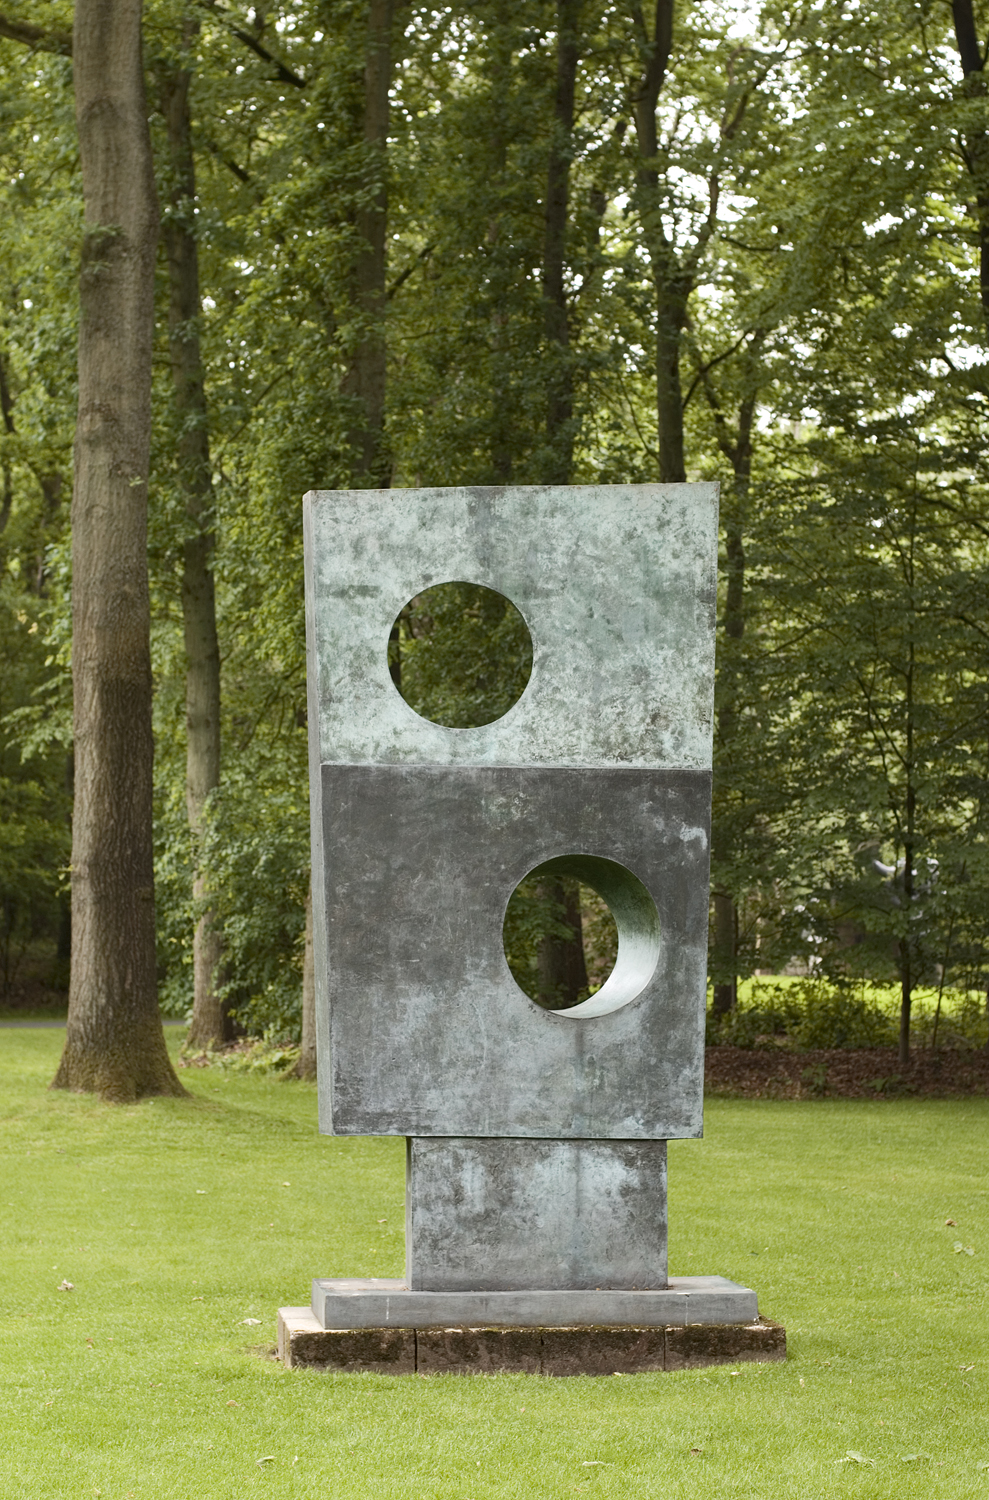 Squares with Two Circles by Barbara Hepworth - 1963 - 1964 - 3061 x 1372 x 318 cm Kröller-Müller Museum